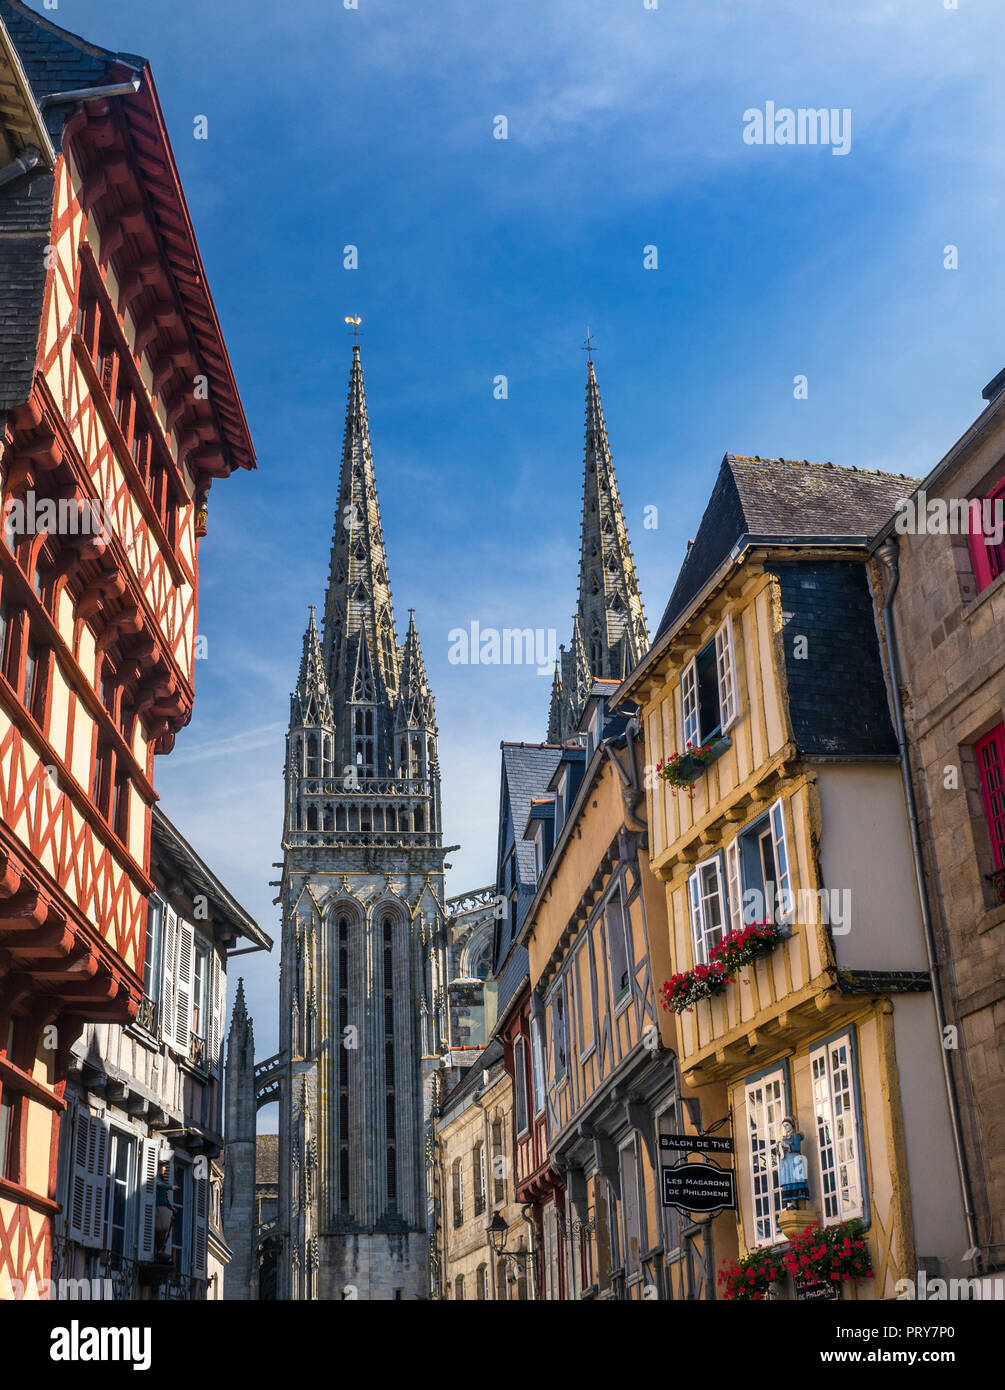 Quimper medieval half timbered old historic shopping quarter Cathedral spire in background Quimper Brittany  France Stock Photo